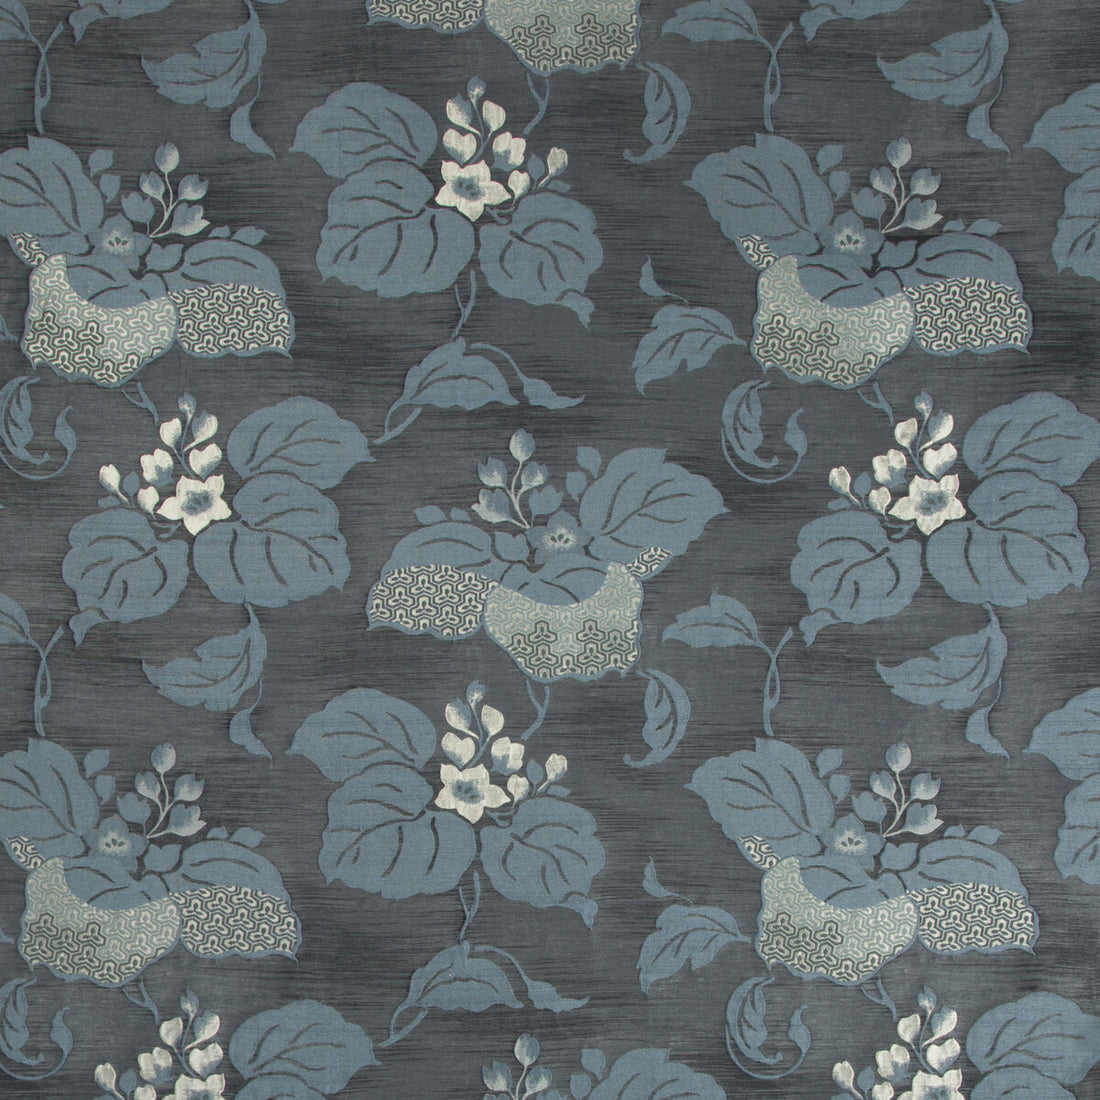 Dressed Up fabric in indigo color - pattern 34931.50.0 - by Kravet Couture in the Modern Tailor collection